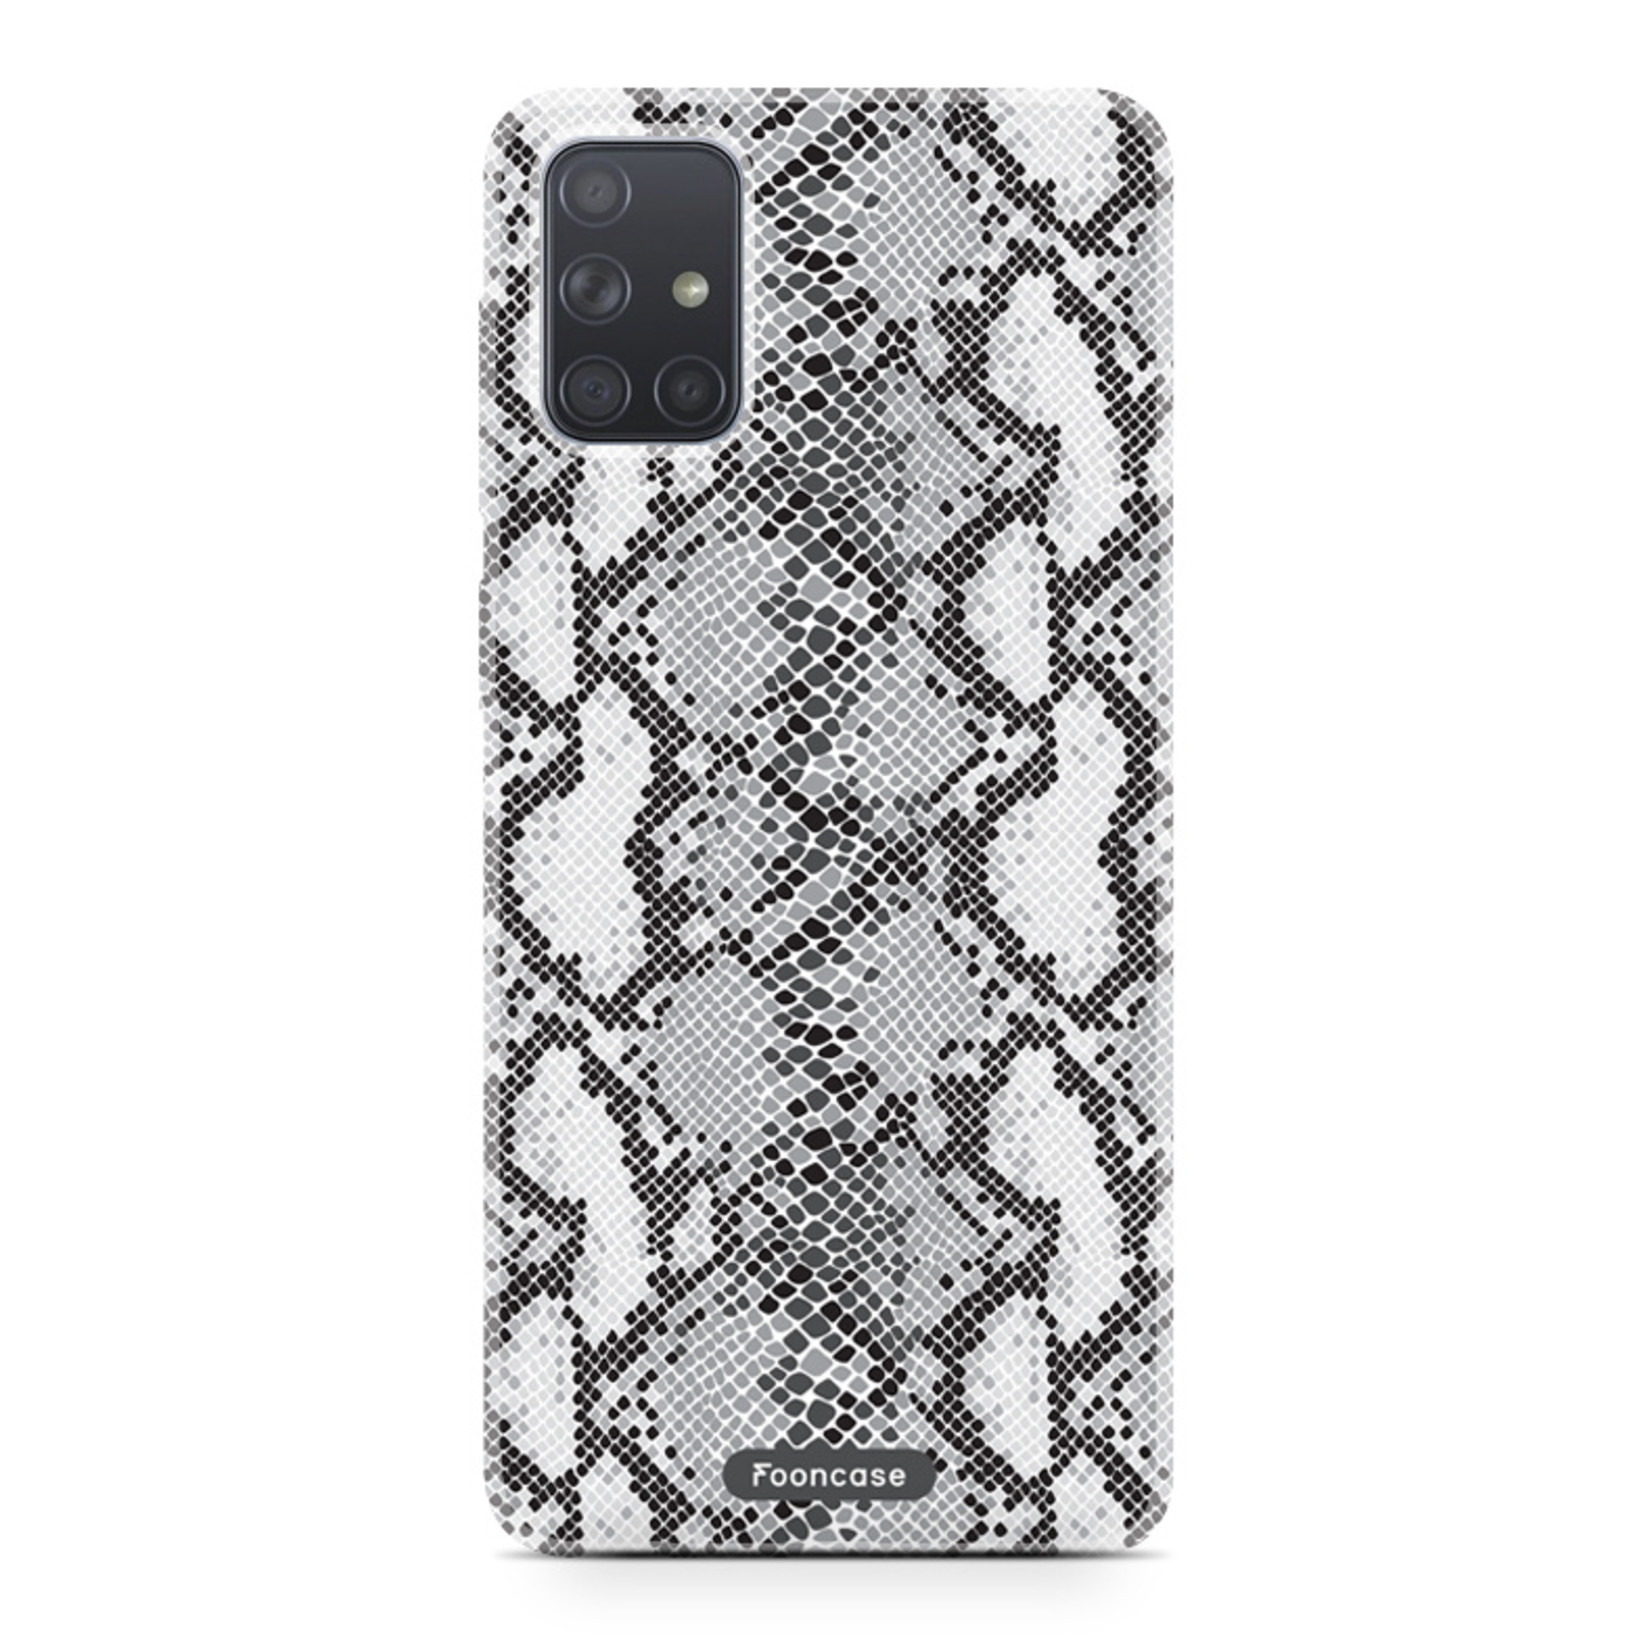 Samsung Galaxy A51 Cover - Snake it!